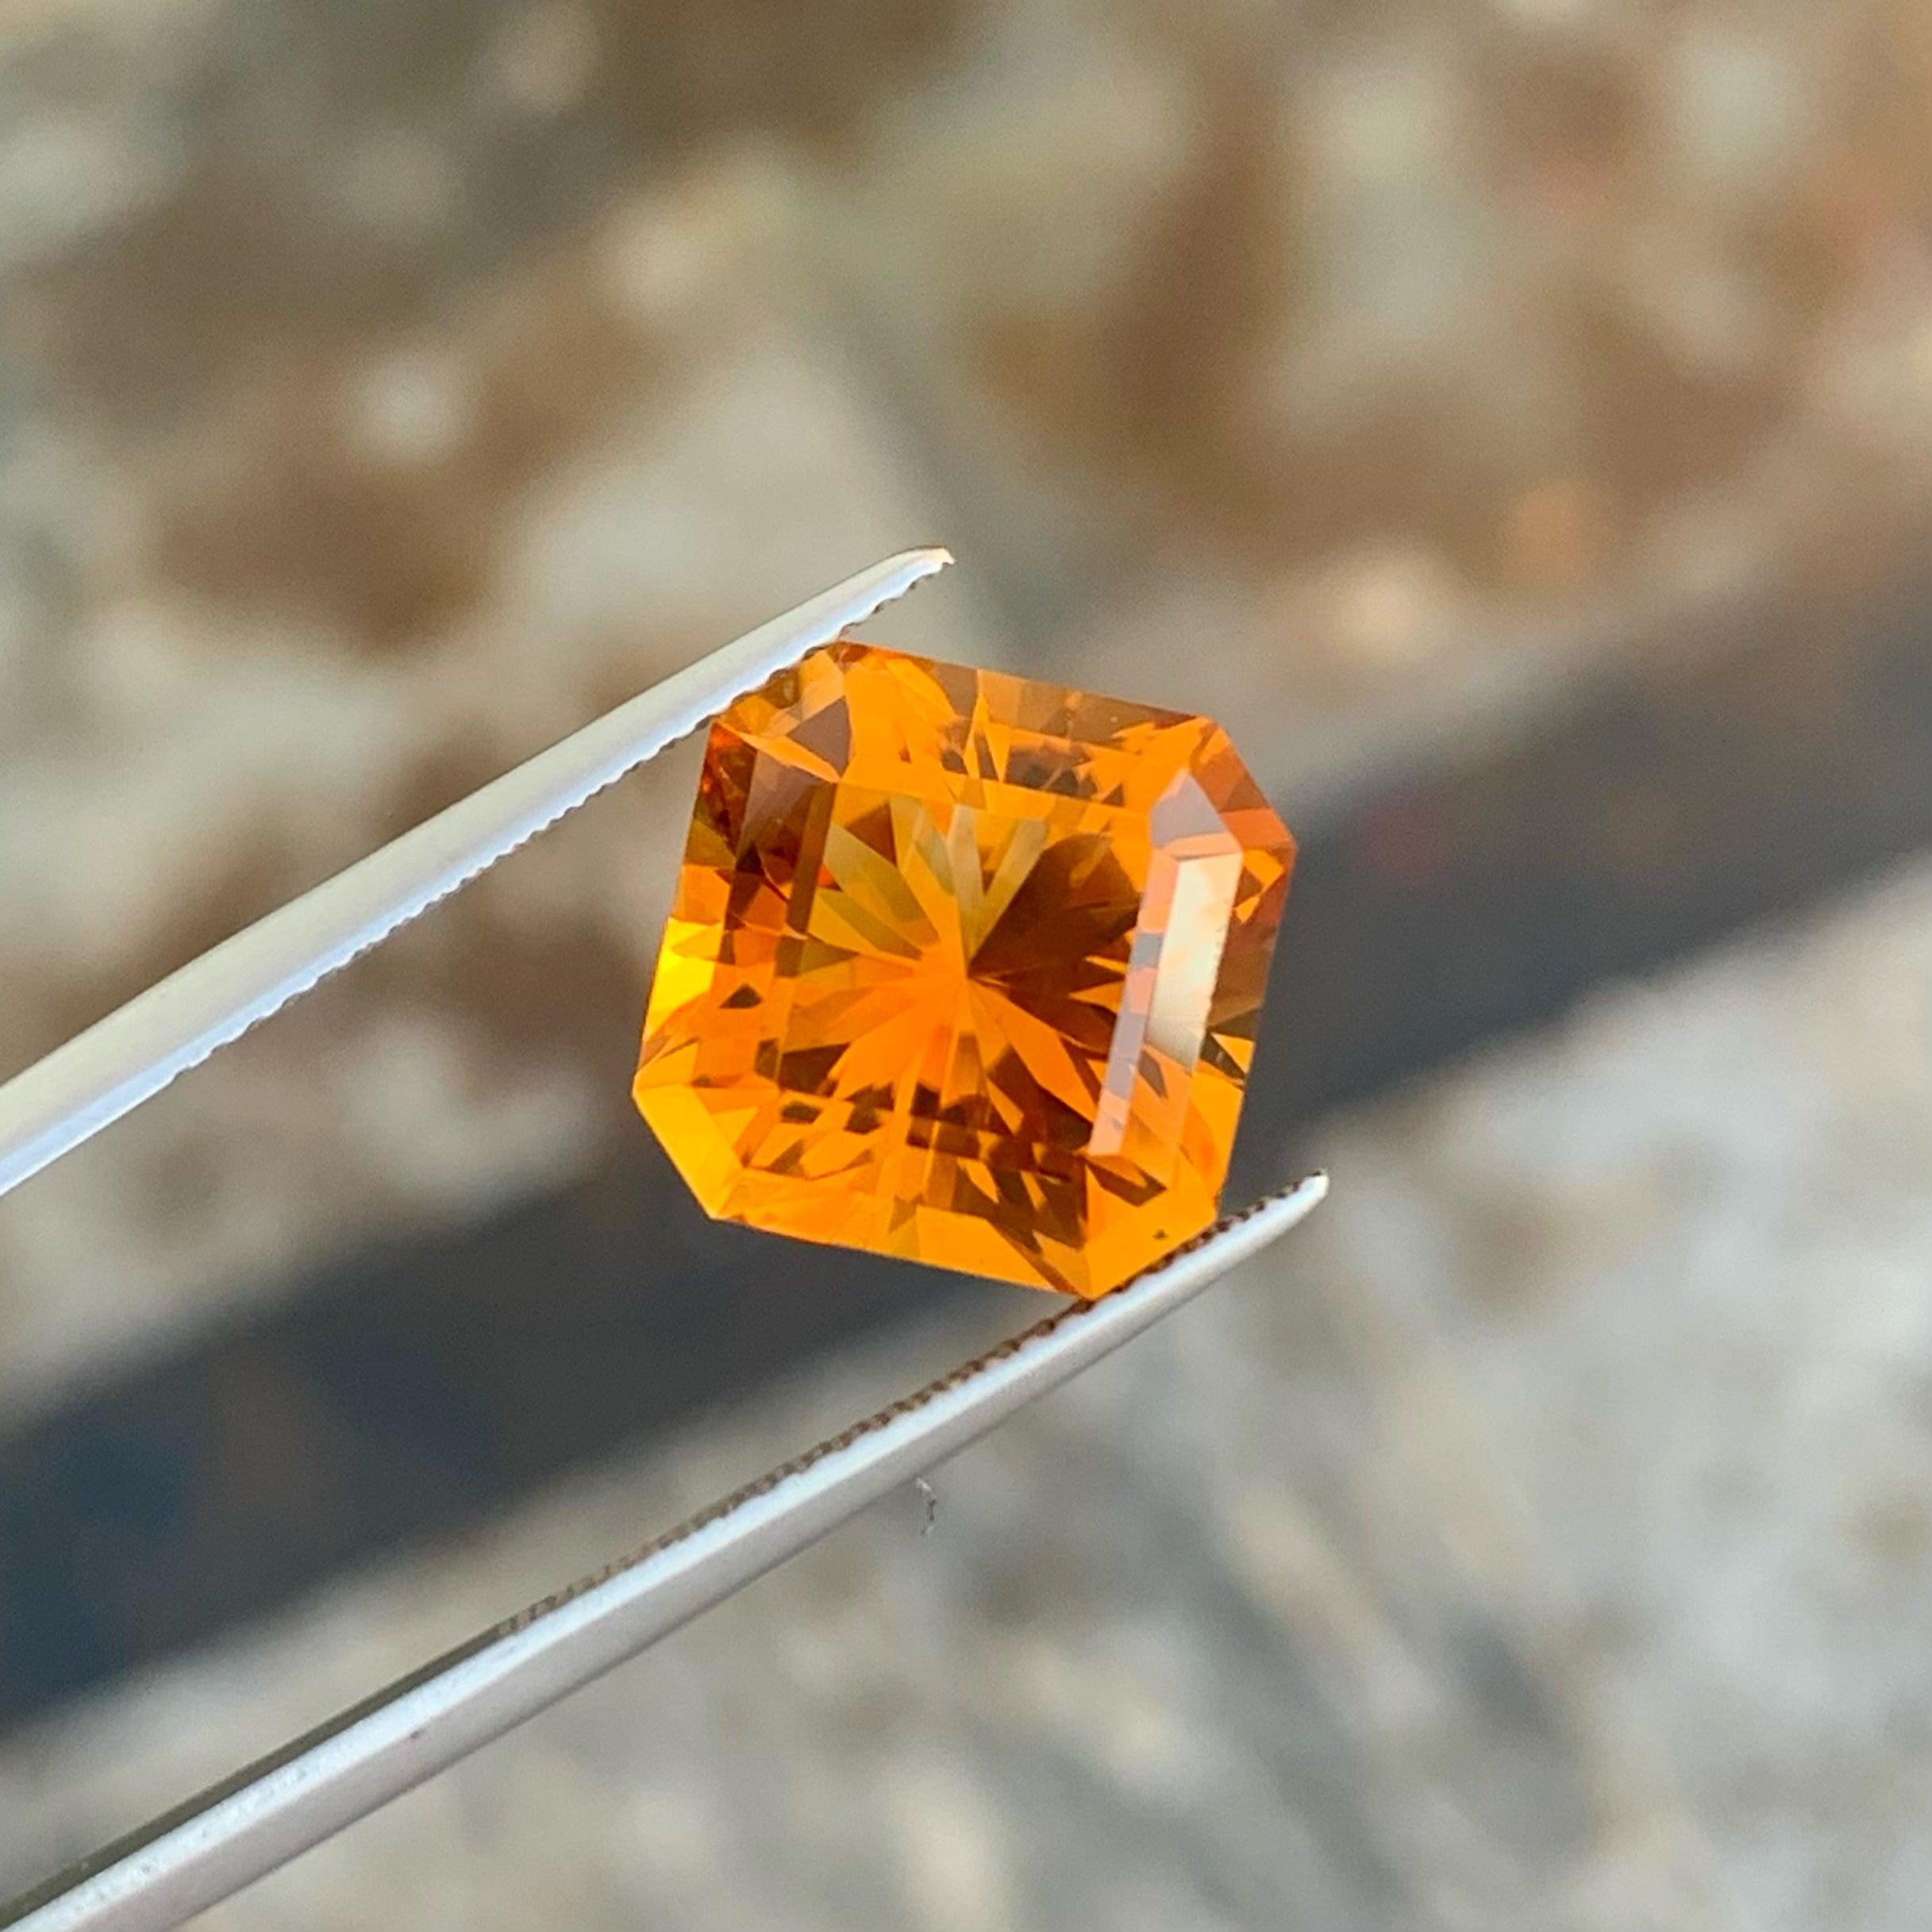 Adorable Natural Madeira Citrine Gemstone, Available for sale at whole sale price natural high quality 8.45 Carats Loupe Clean Loose Citrine From Brazil.

Product Information:
GEMSTONE TYPE: Adorable Natural Madeira Citrine Gemstone
WEIGHT: 8.45